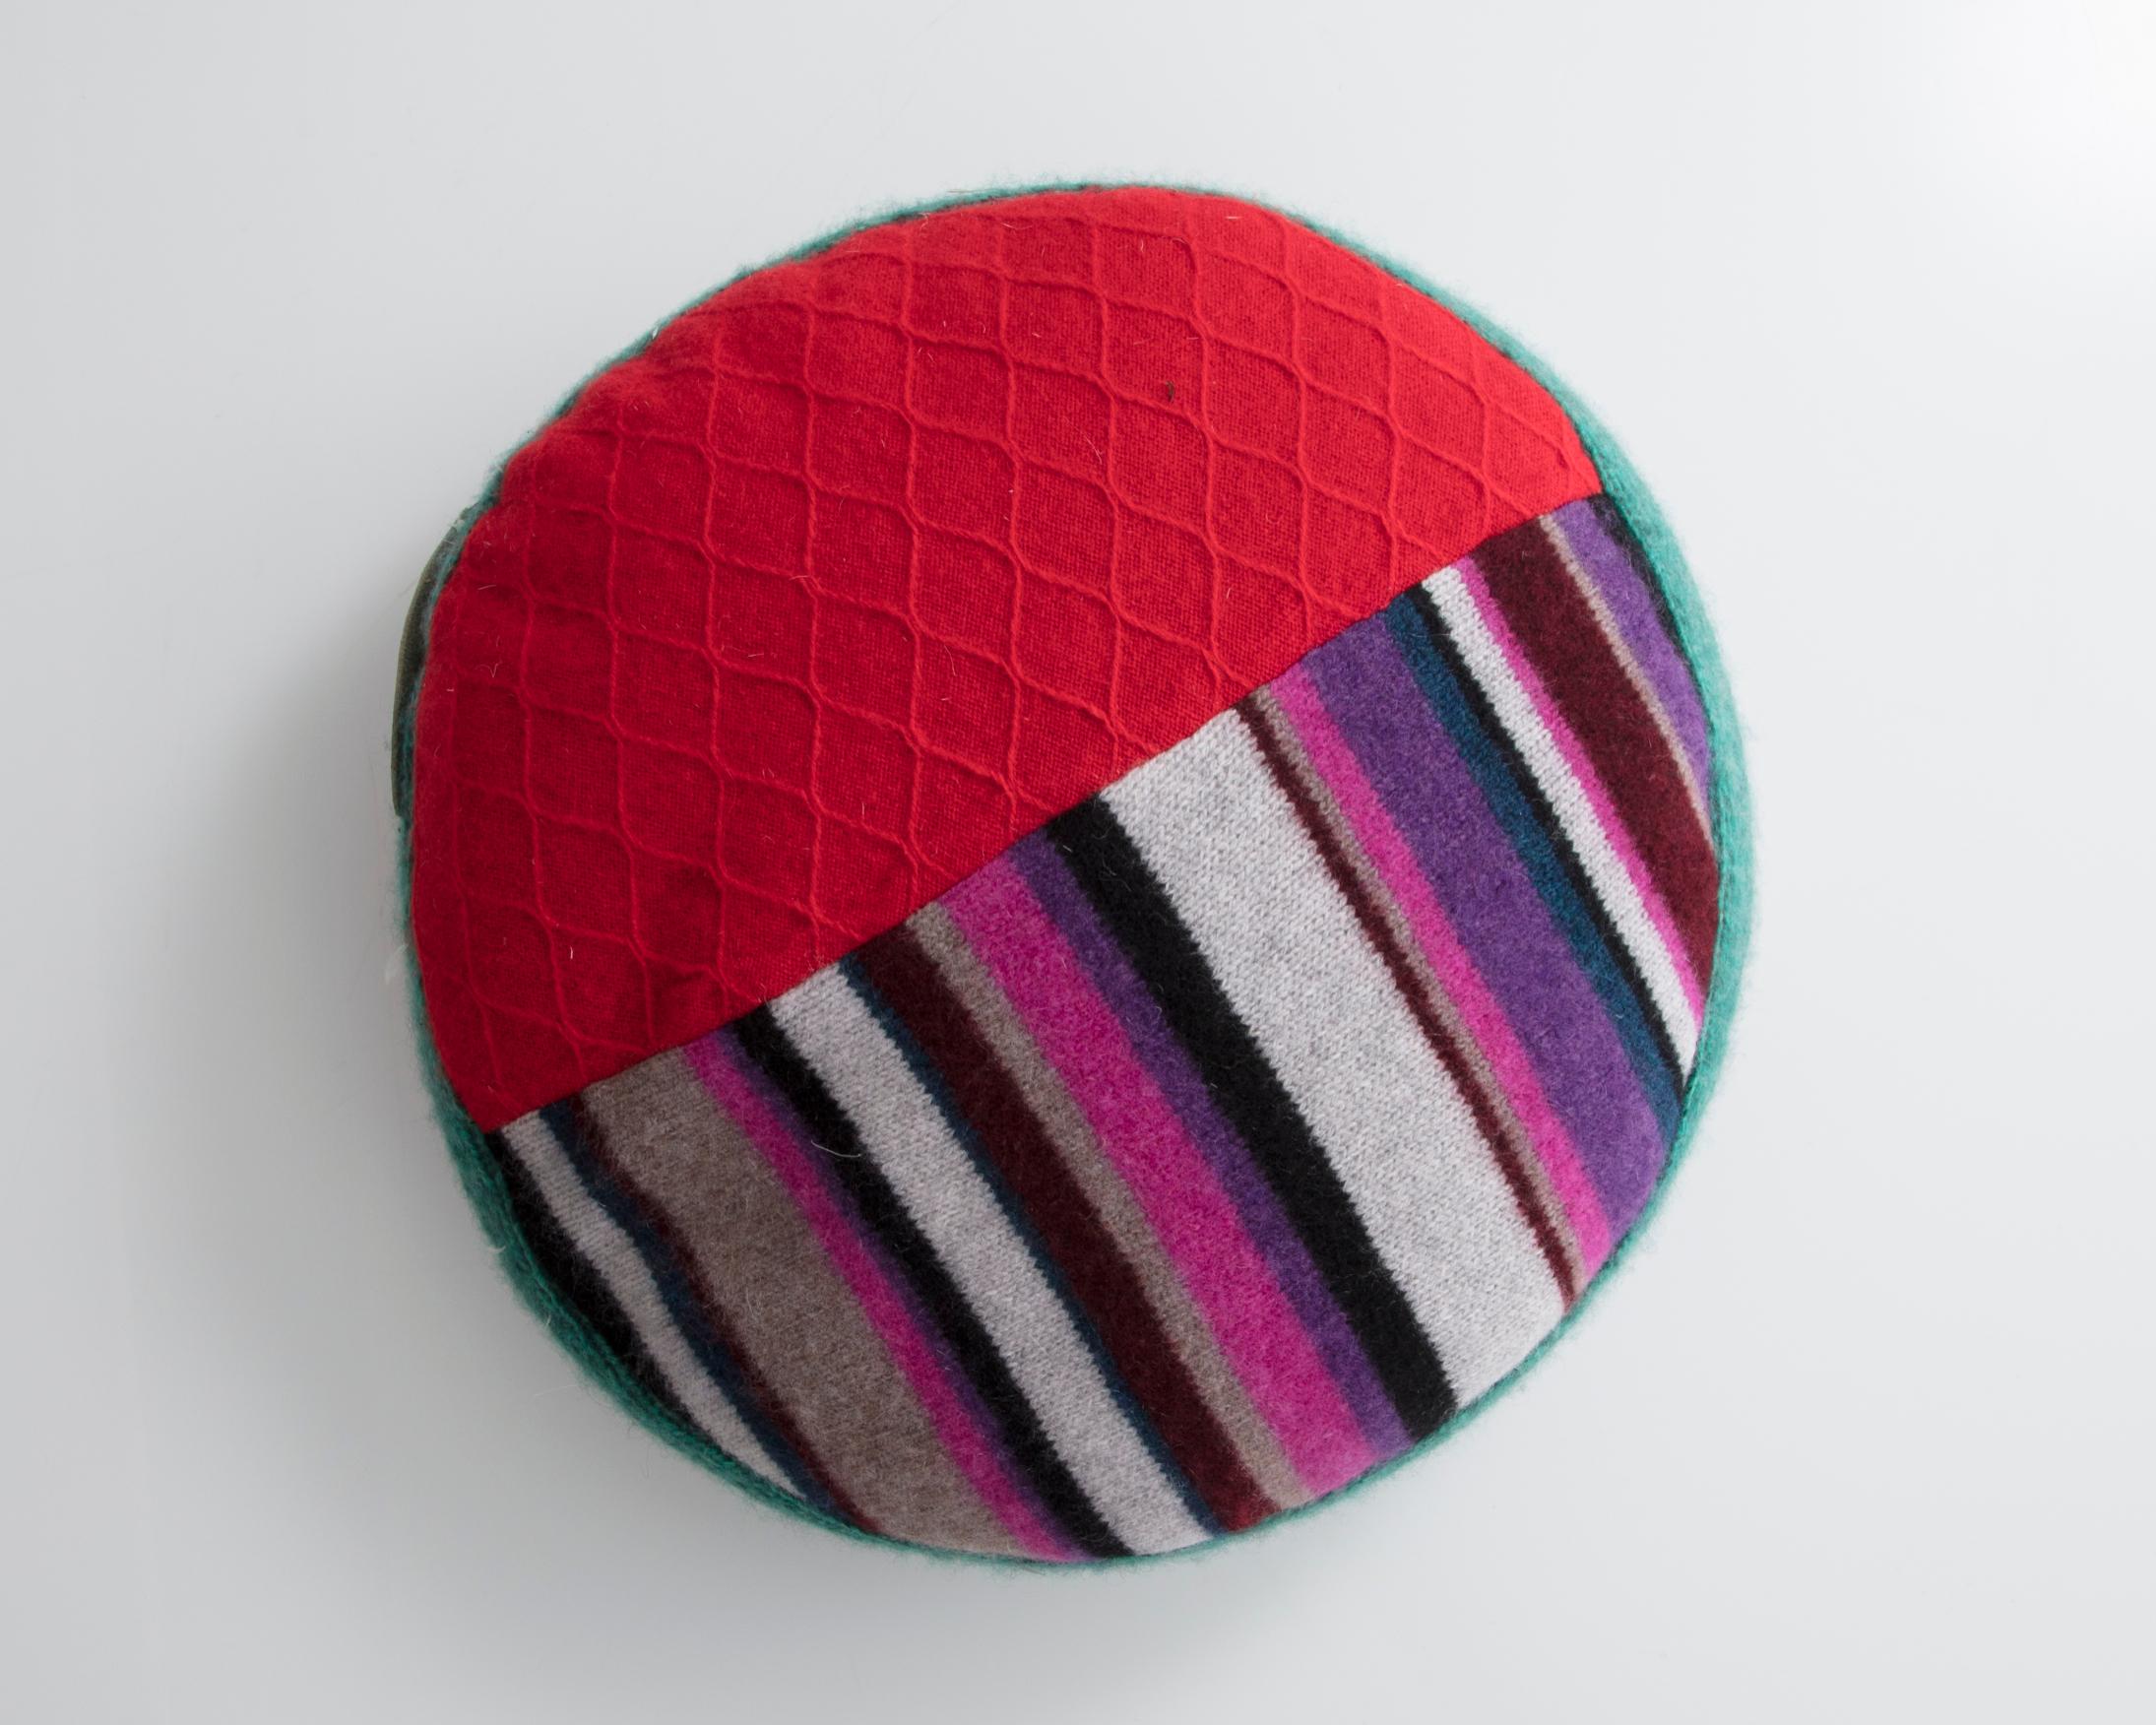 Unique round pillow in multi-colored cashmere. Designed and made by Greg Chait, USA, 2016.